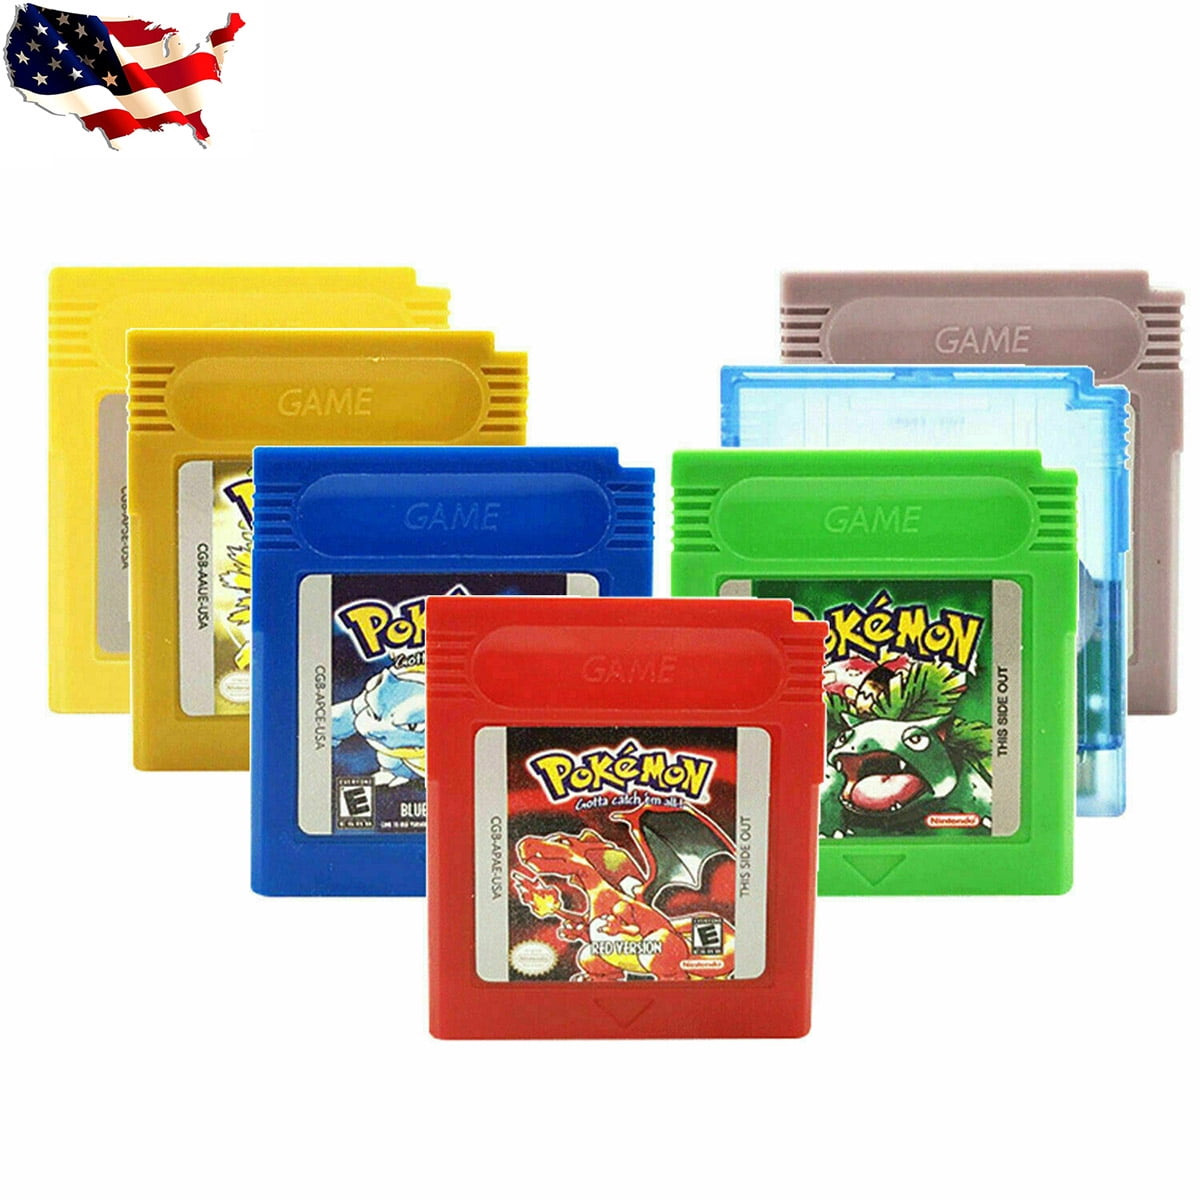 NEW Version Pokemon Gold Silver Crystal Red Yellow Blue Green